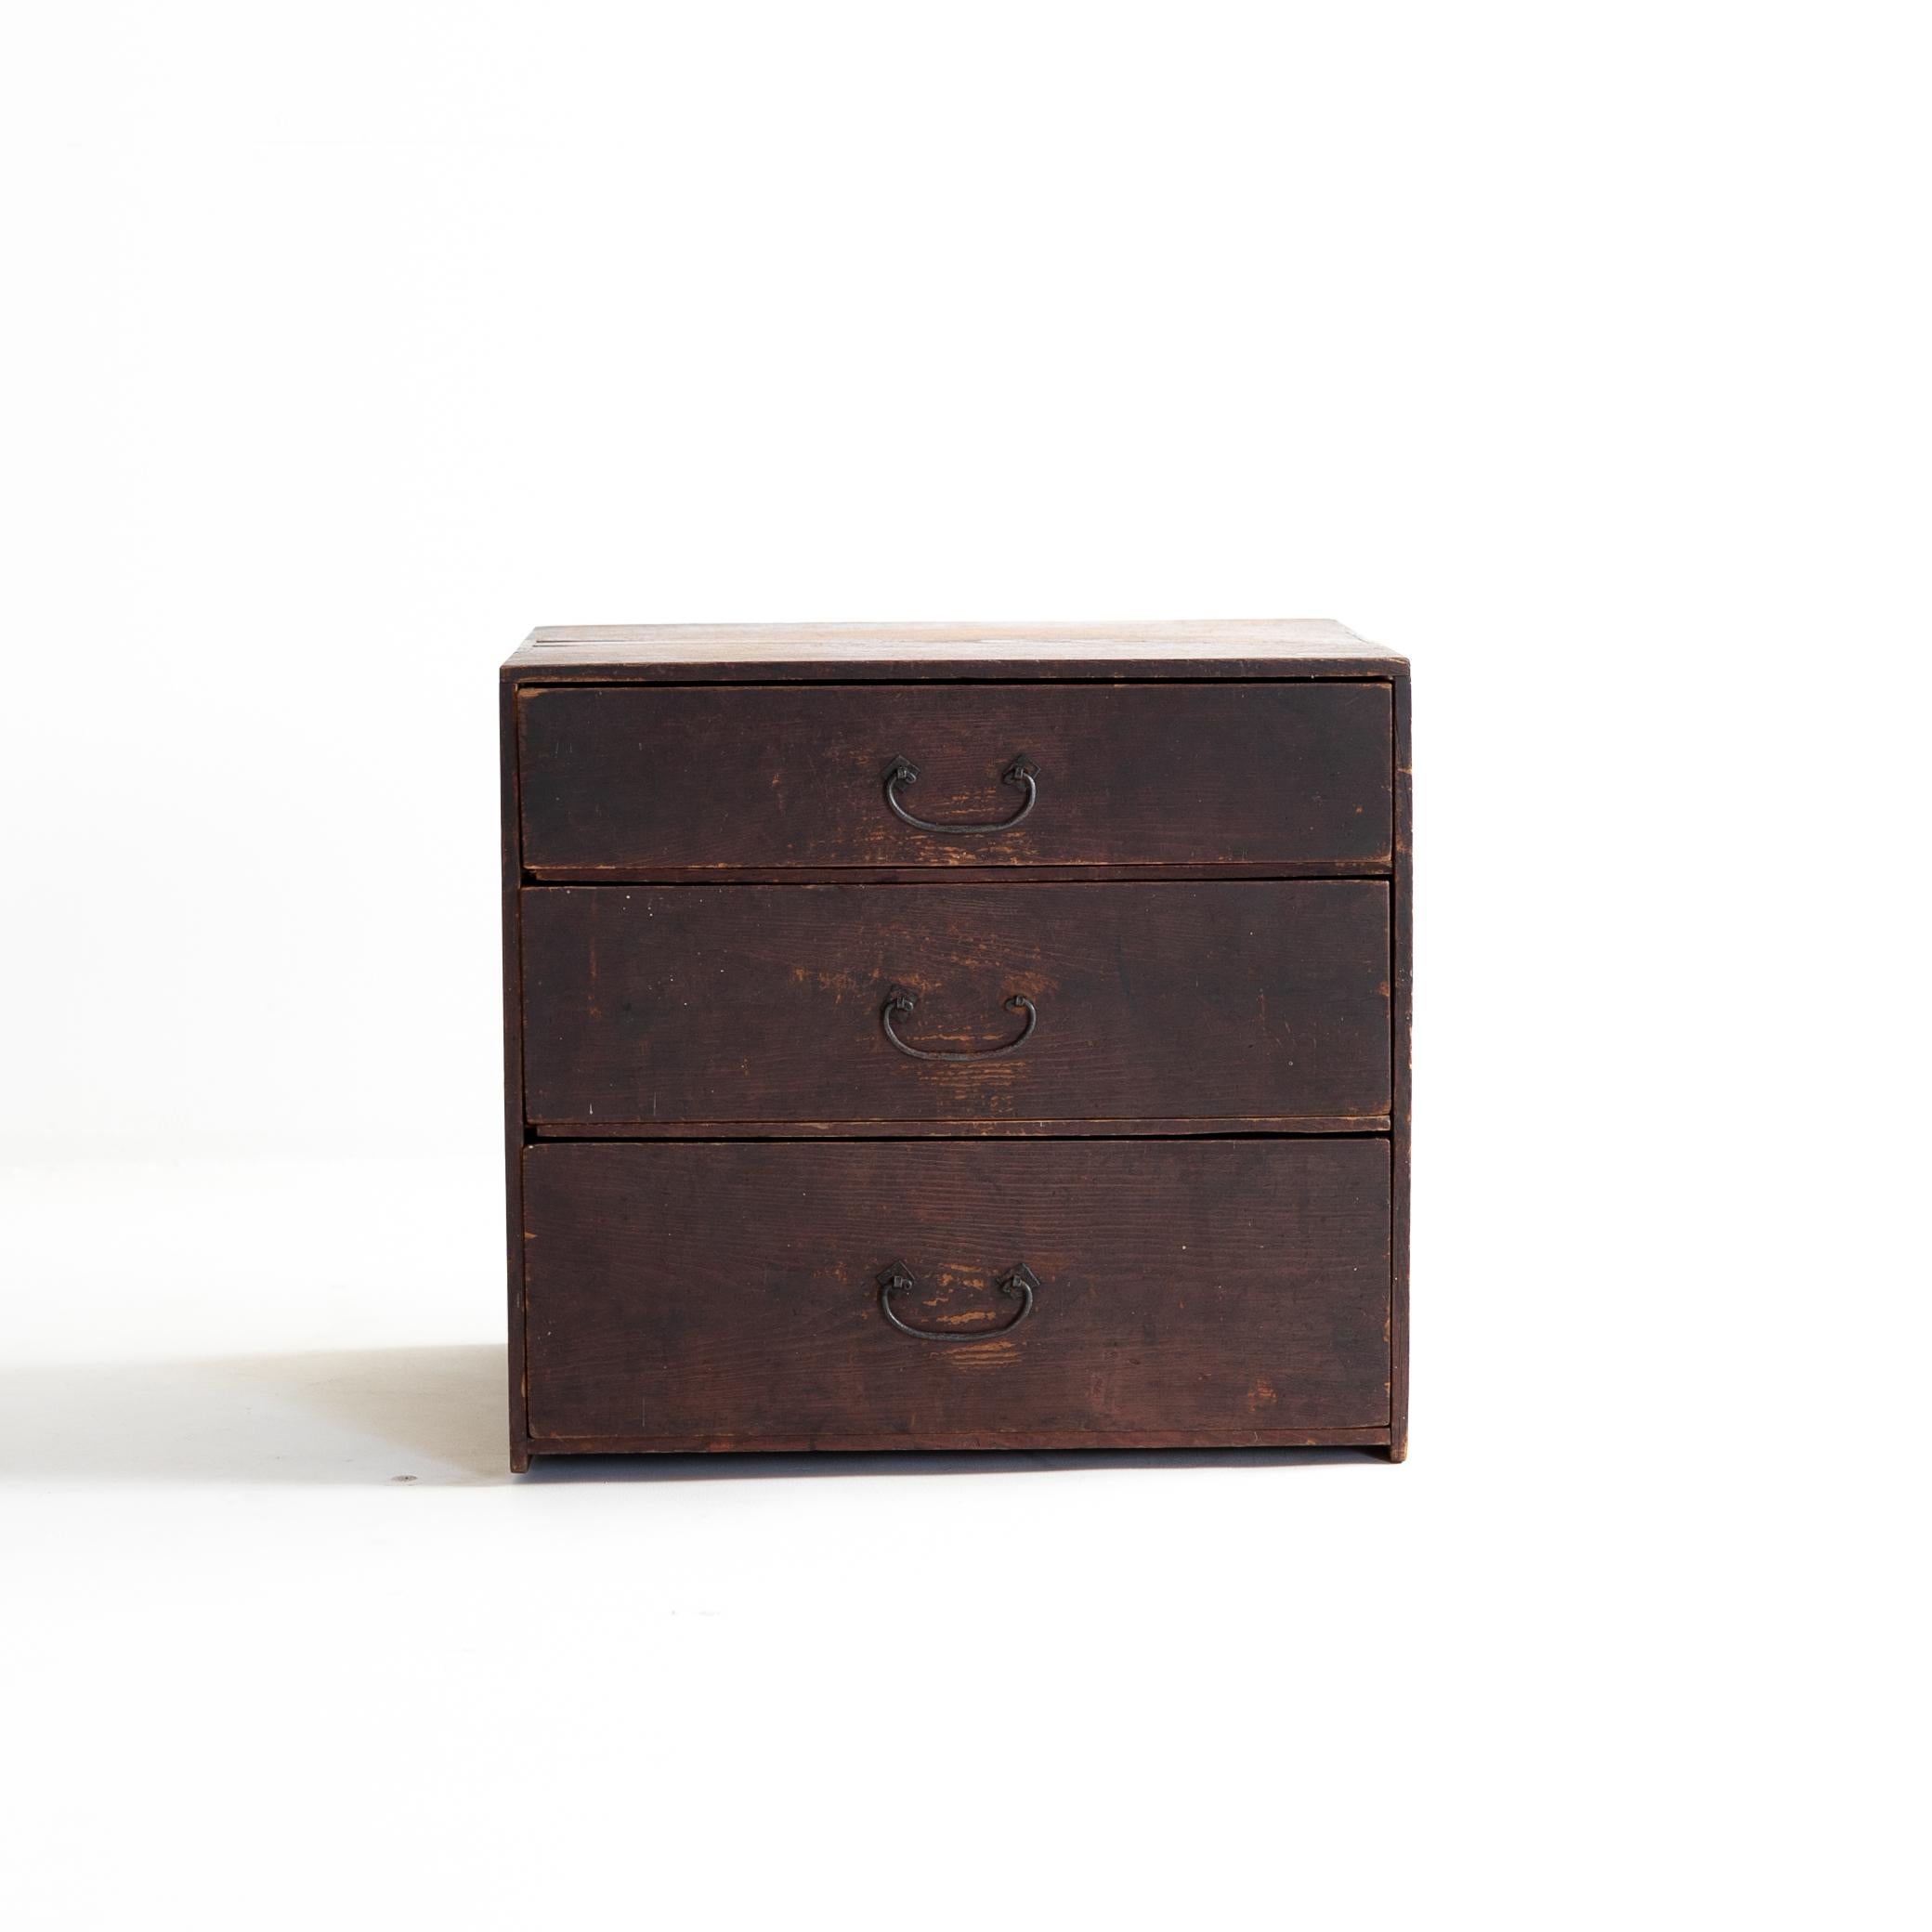 Very old Japanese small drawer.
It was made in the Meiji period (1860s-1900s).
It is made of cedar wood.
The handles are made of iron.

This drawer is rustic, simple and beautiful.
There is no waste in the design.
It is the ultimate in